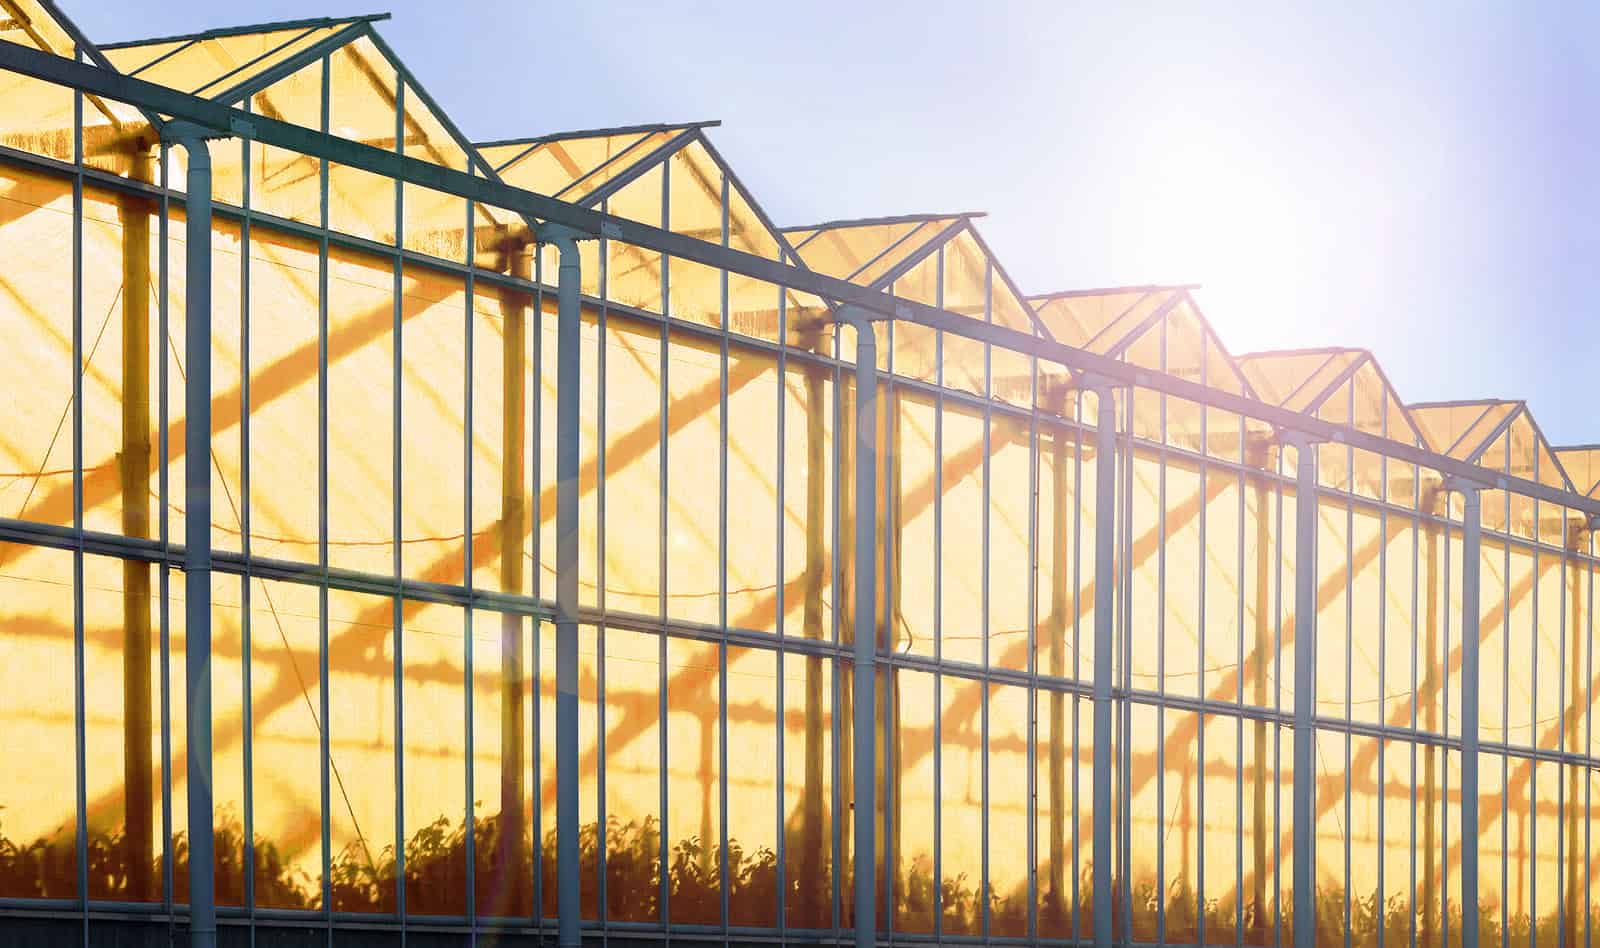 Greenhouse Covering Materials